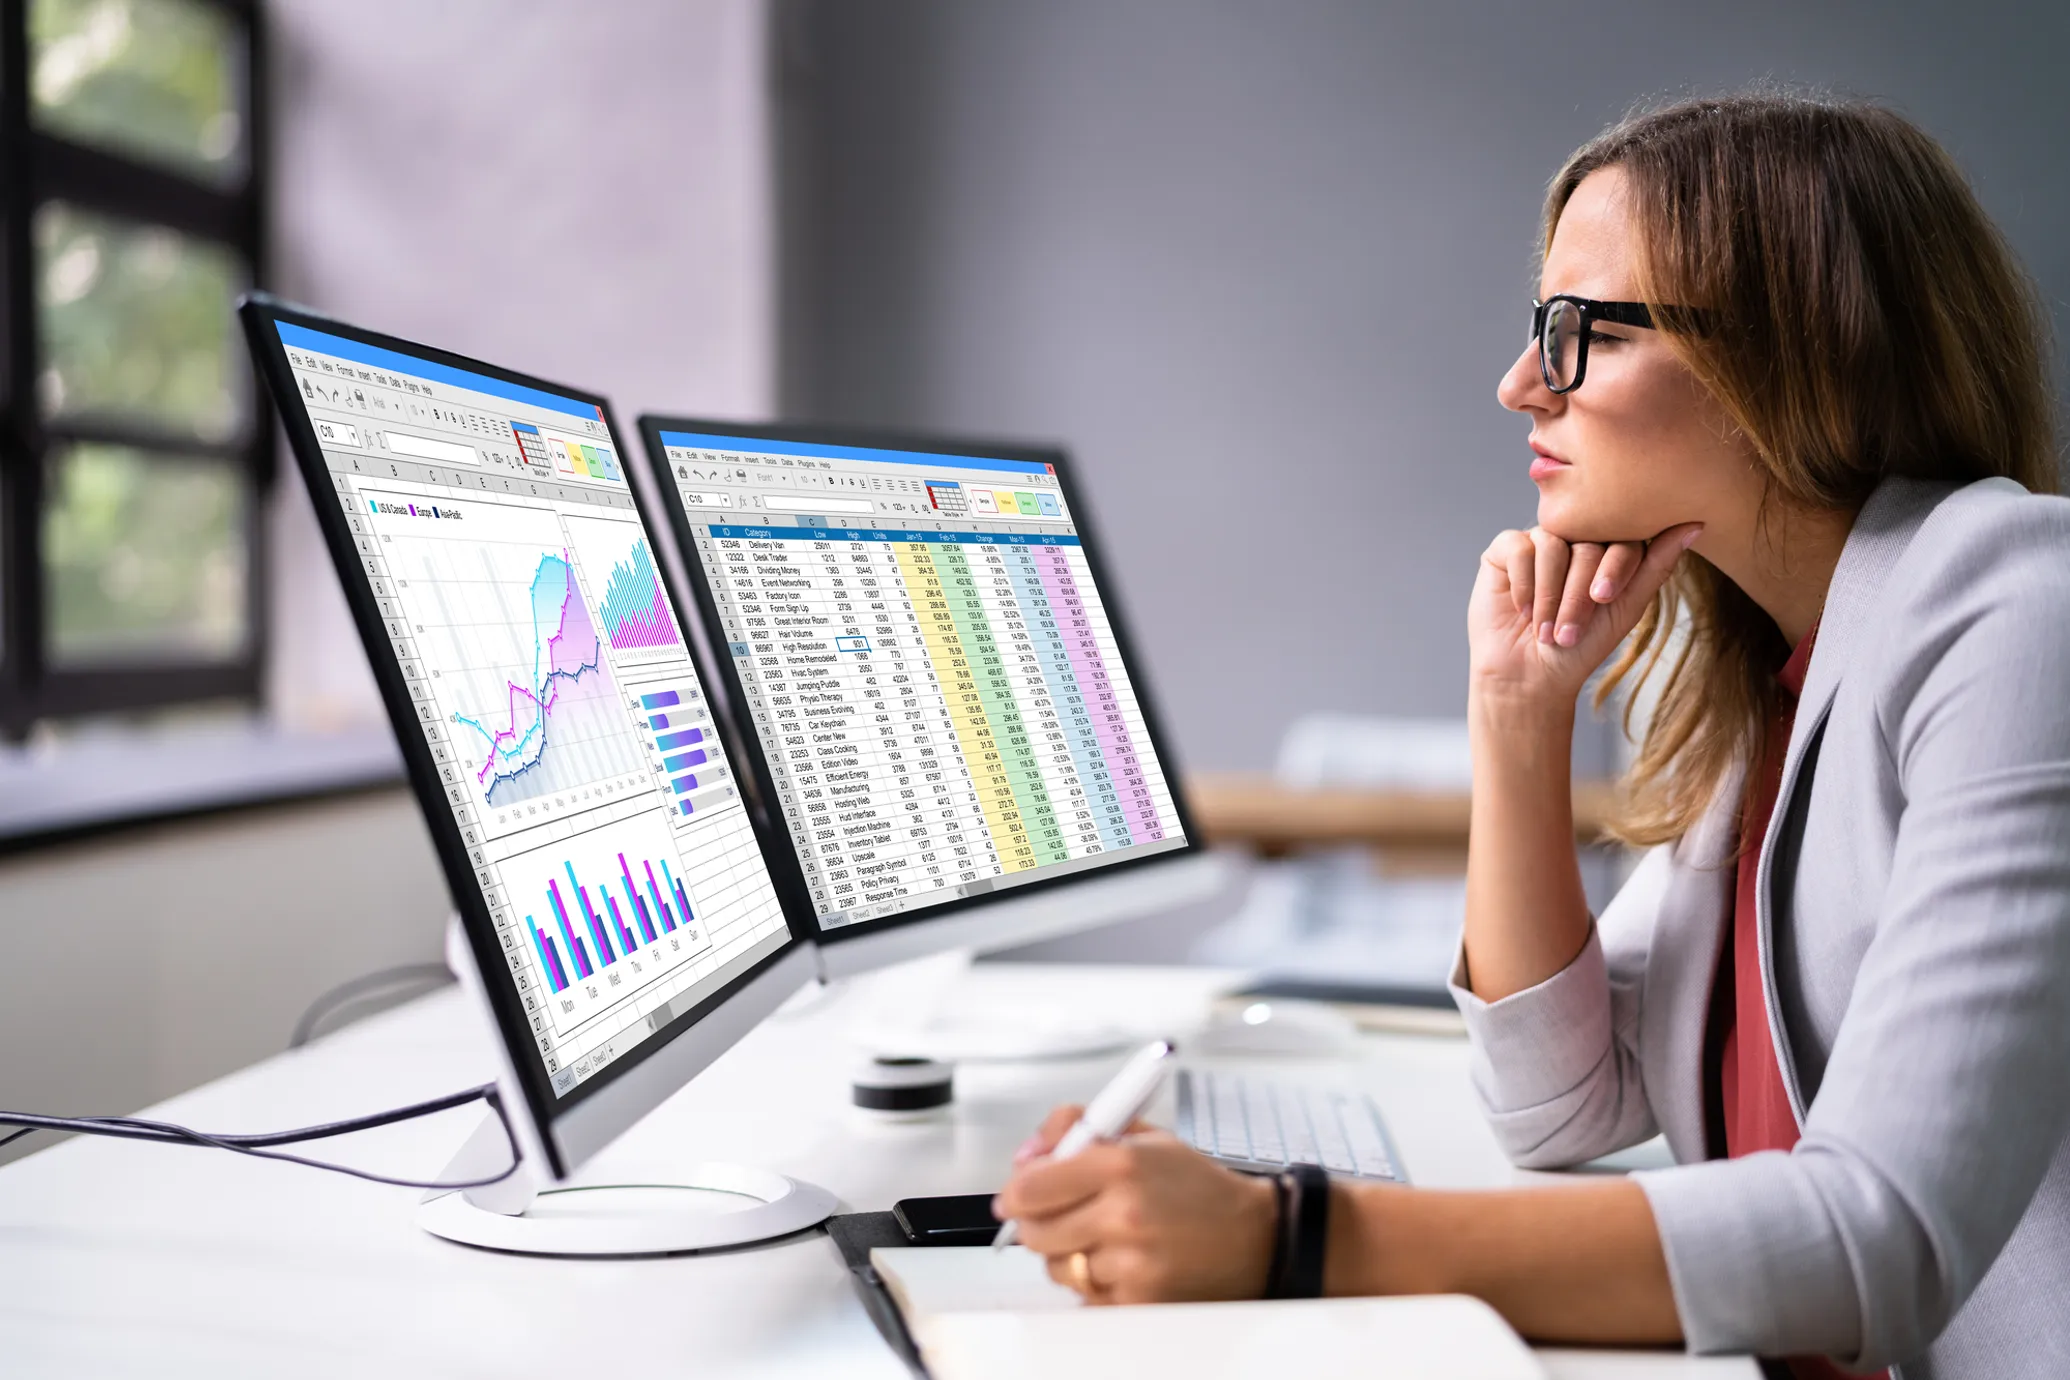 Young woman scrutinizing charts on a monitor